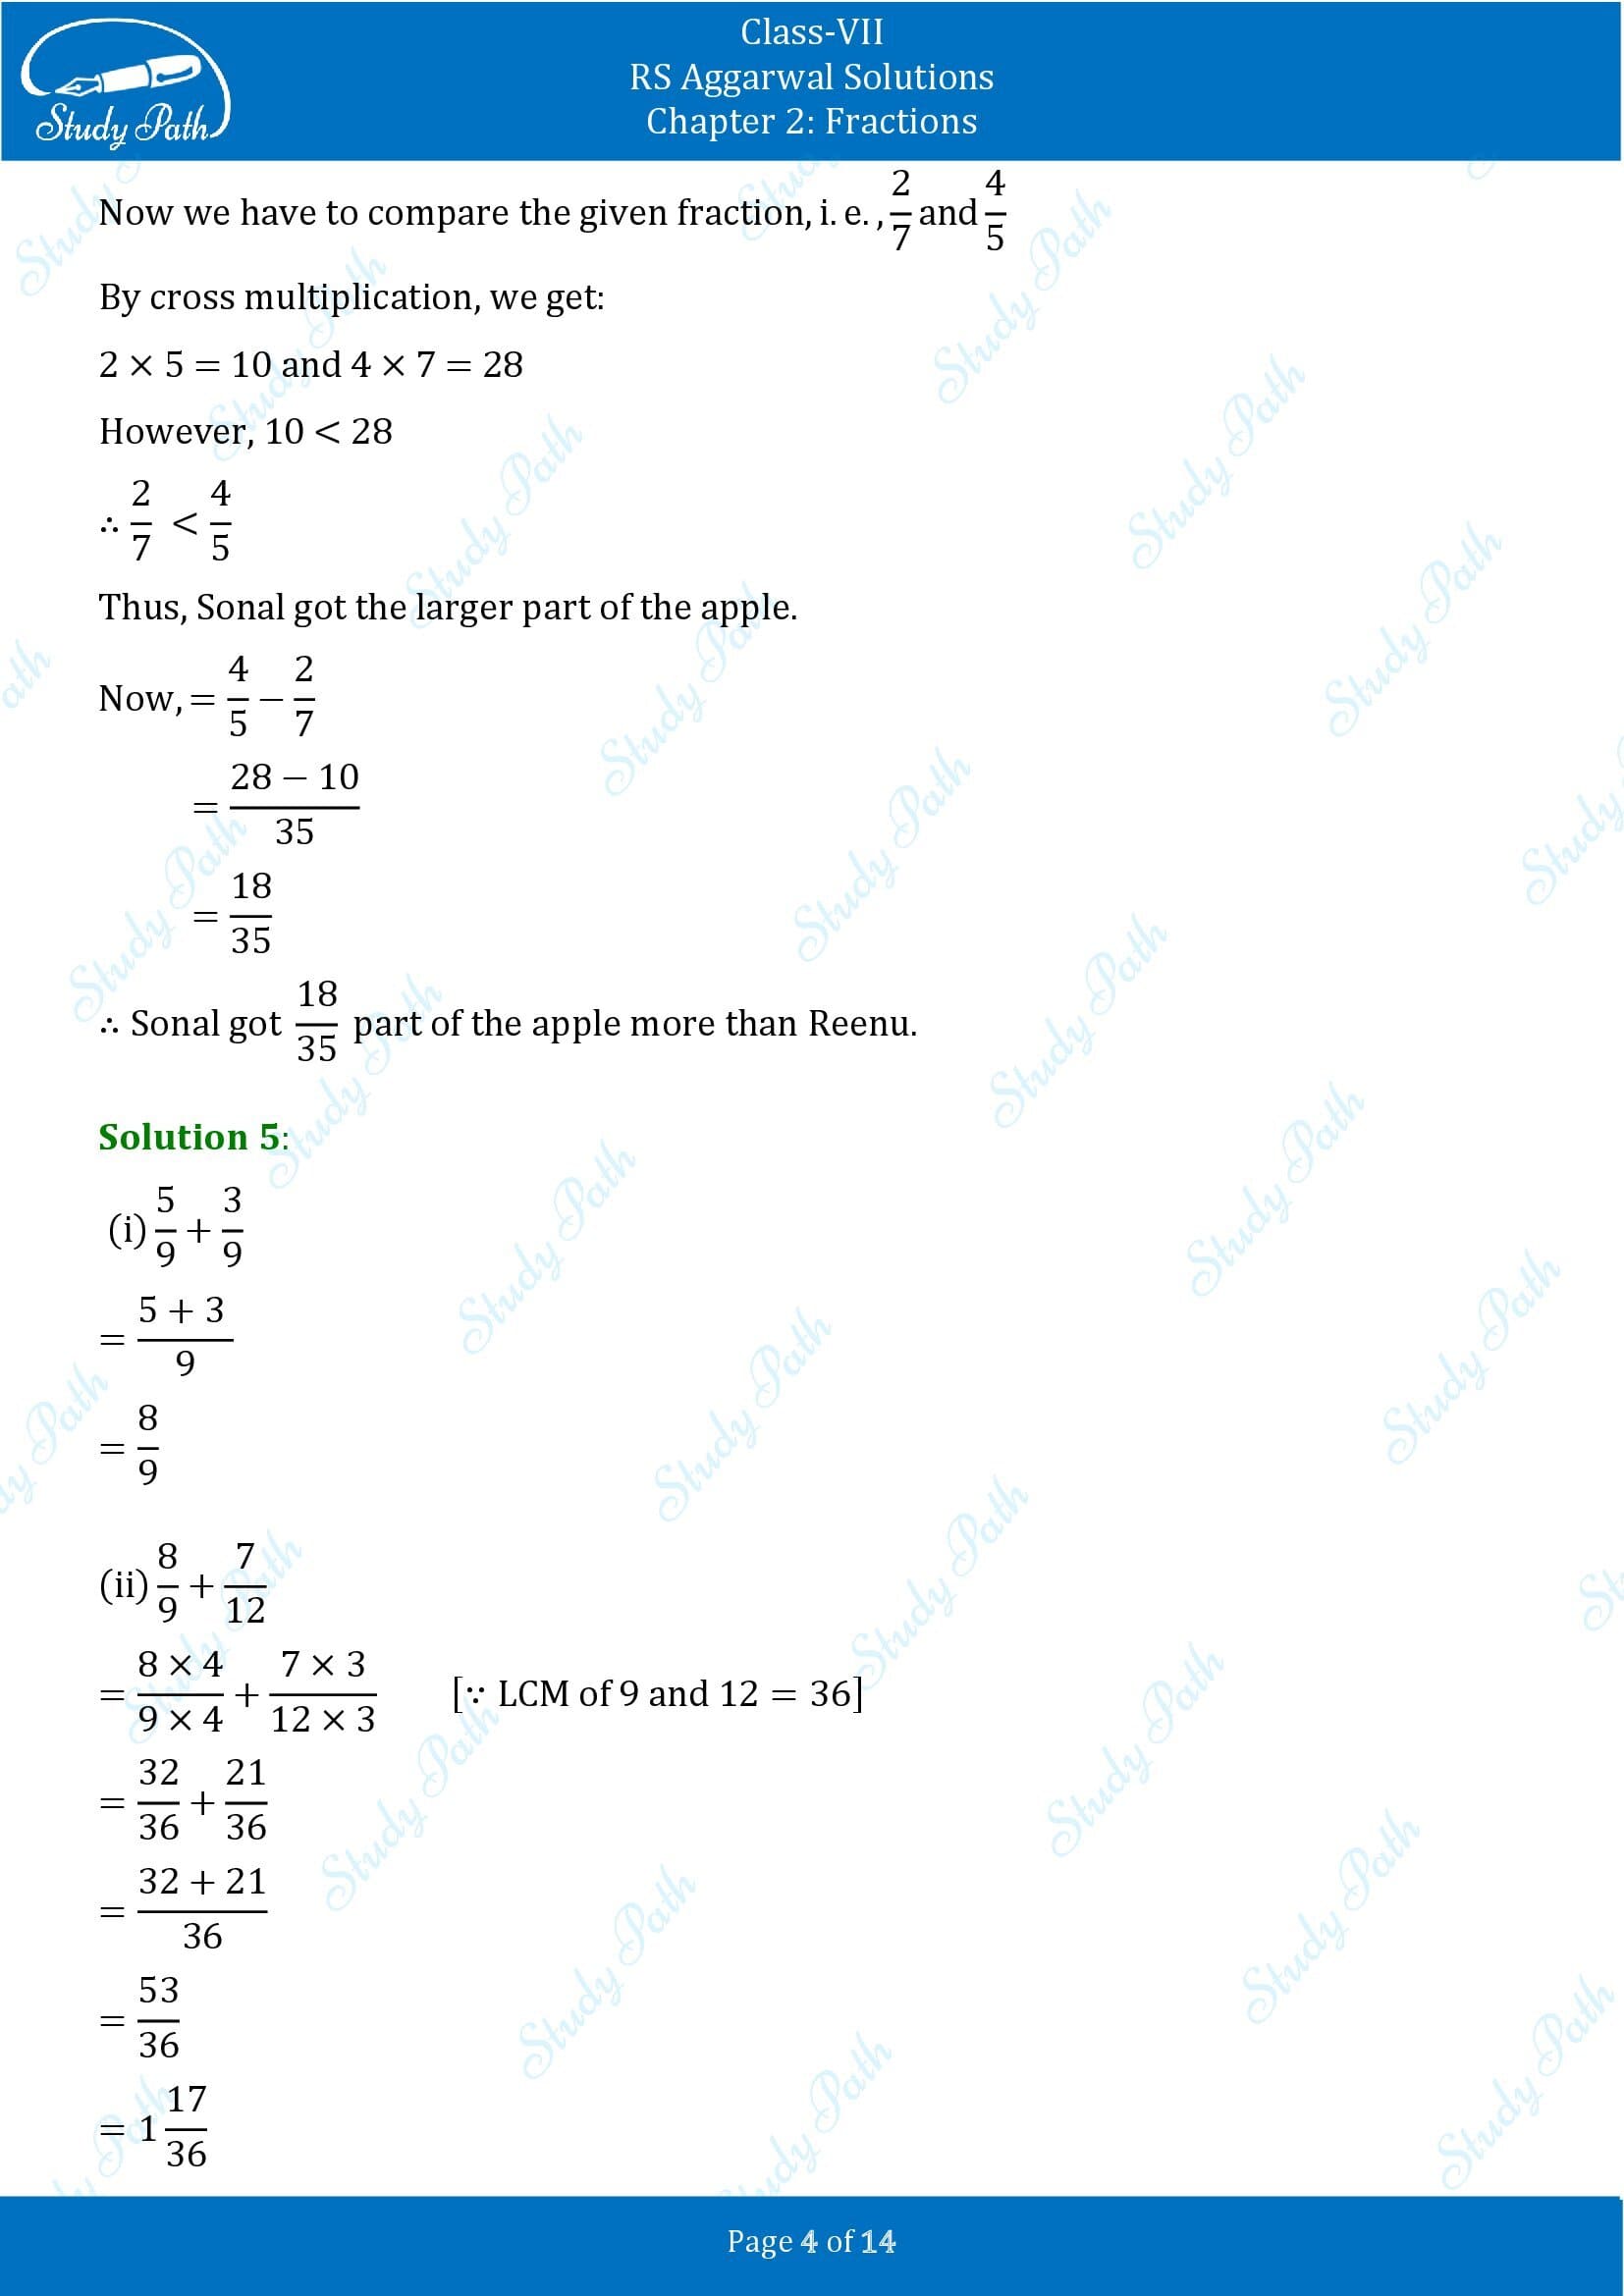 RS Aggarwal Solutions Class 7 Chapter 2 Fractions Exercise 2A 00004